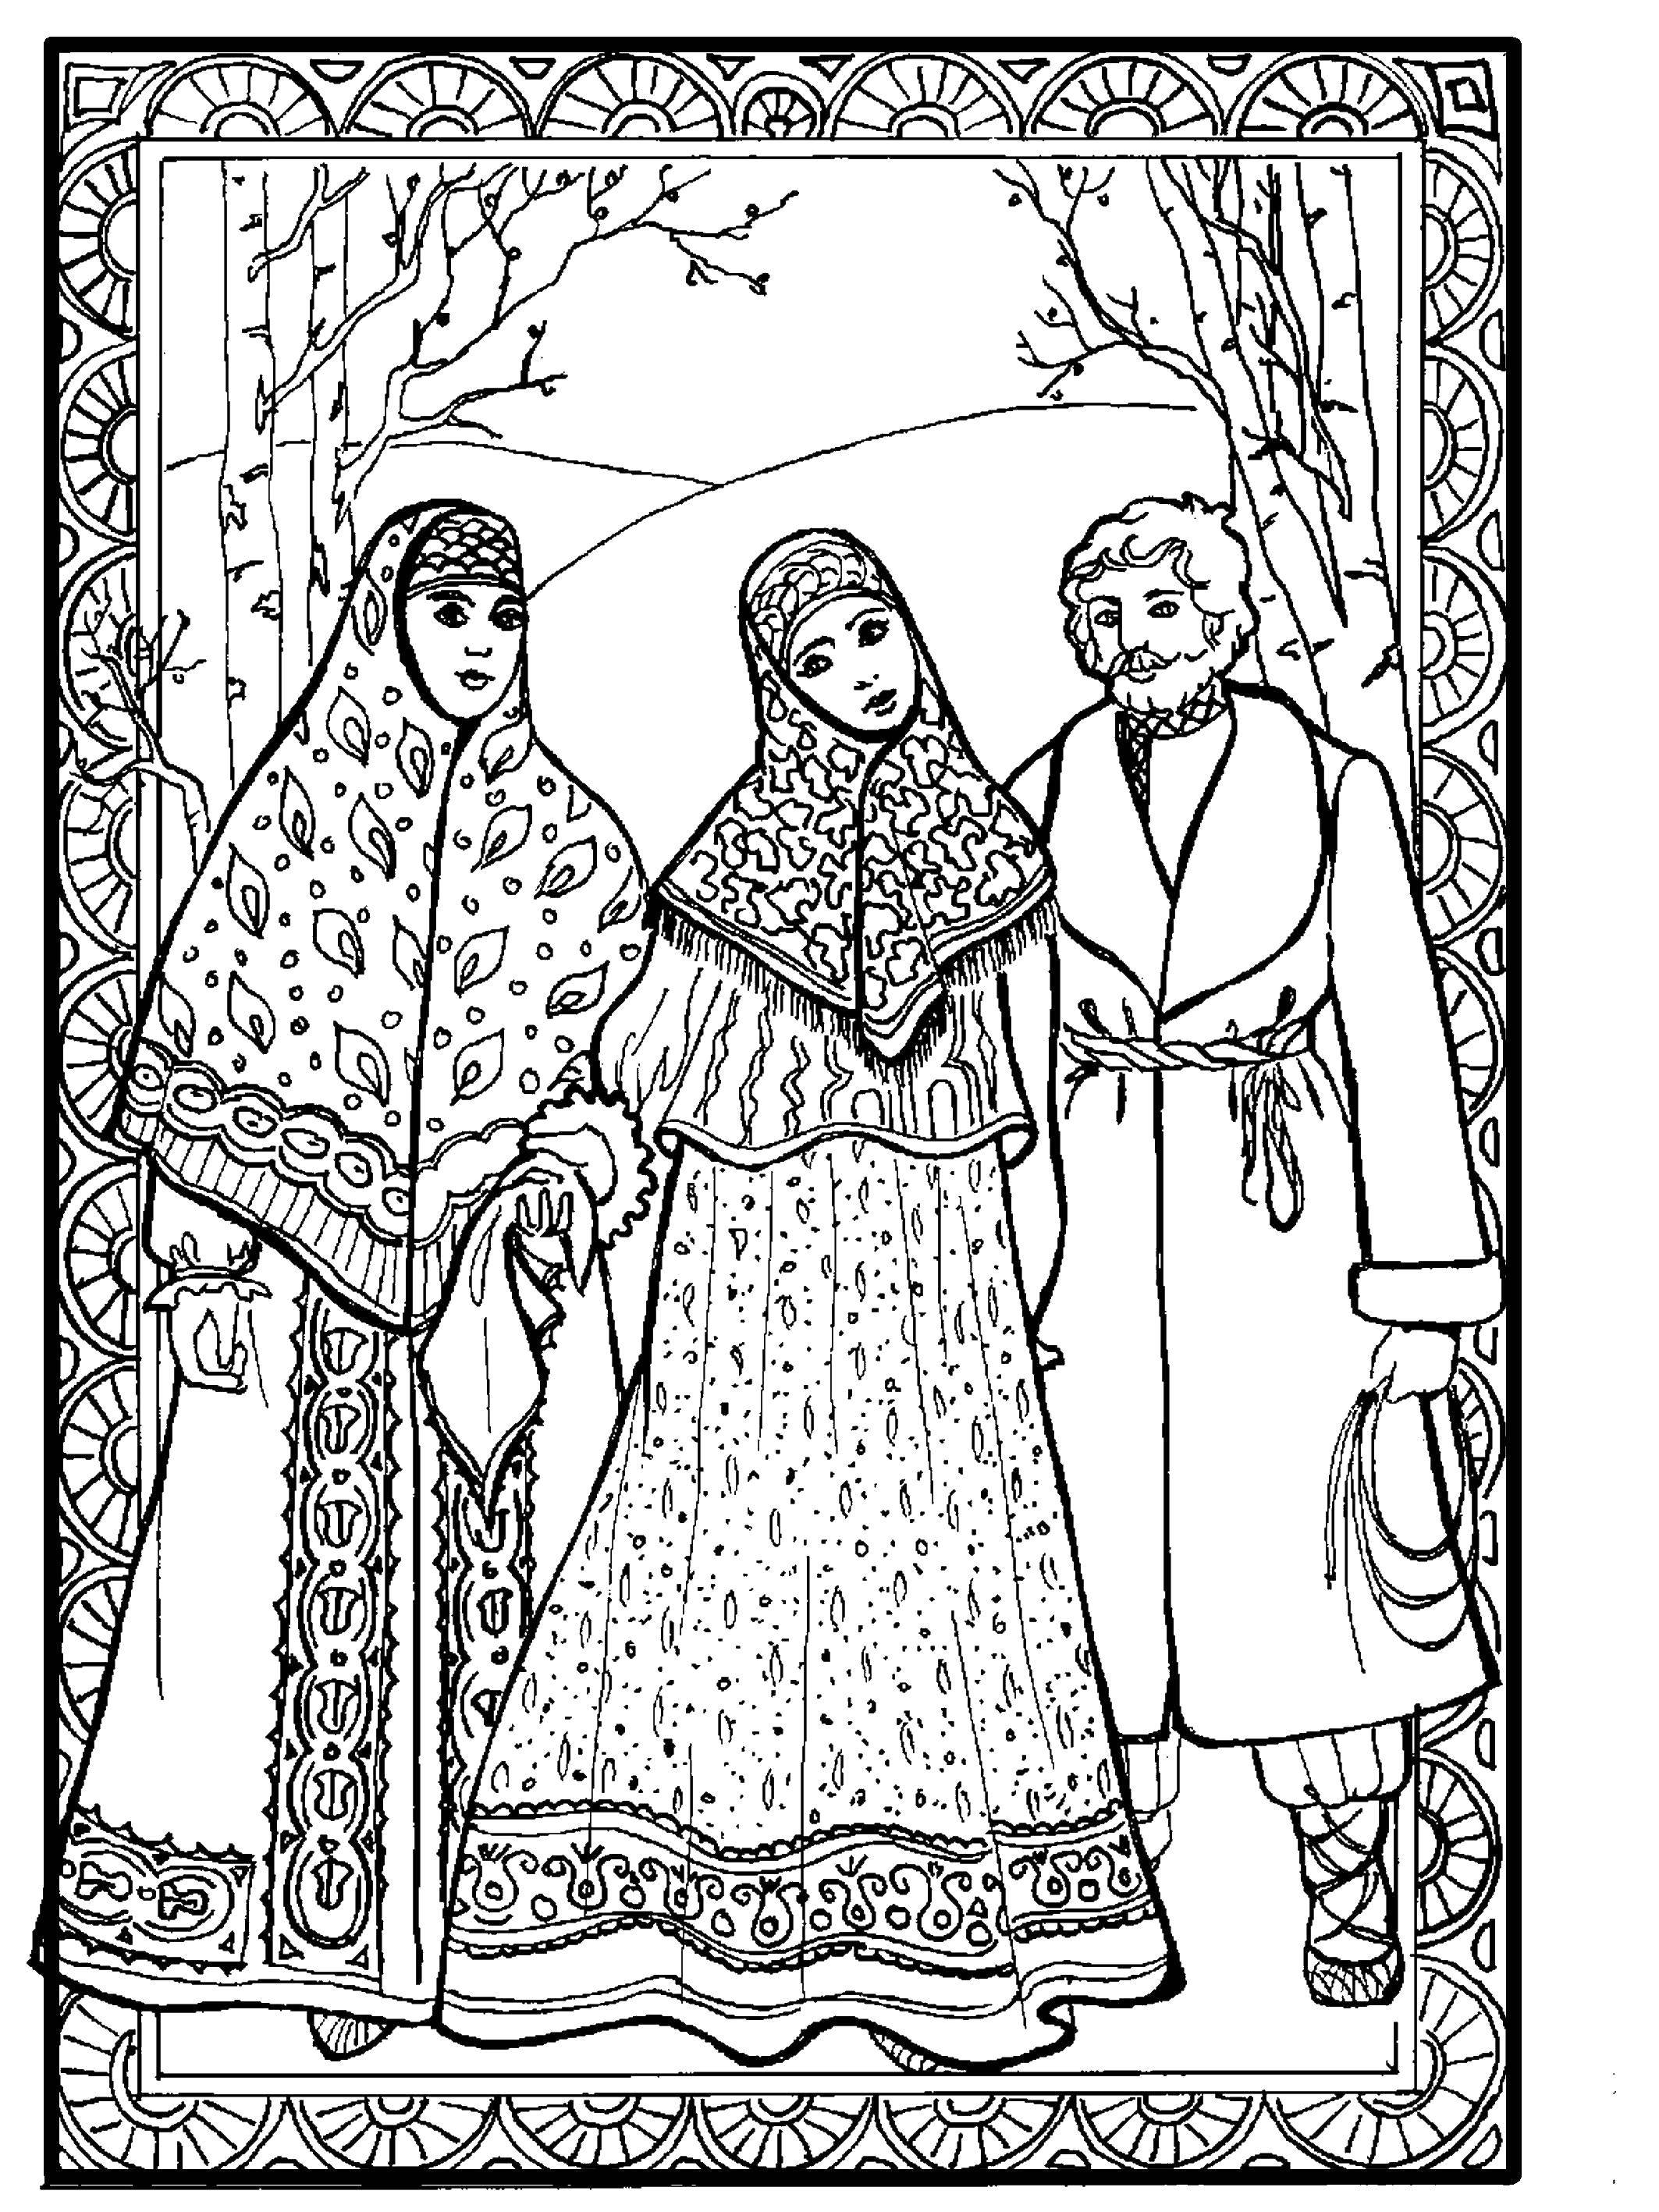 Coloring People in Russian folk costumes. Category clothing. Tags:  clothing, folk shoes.